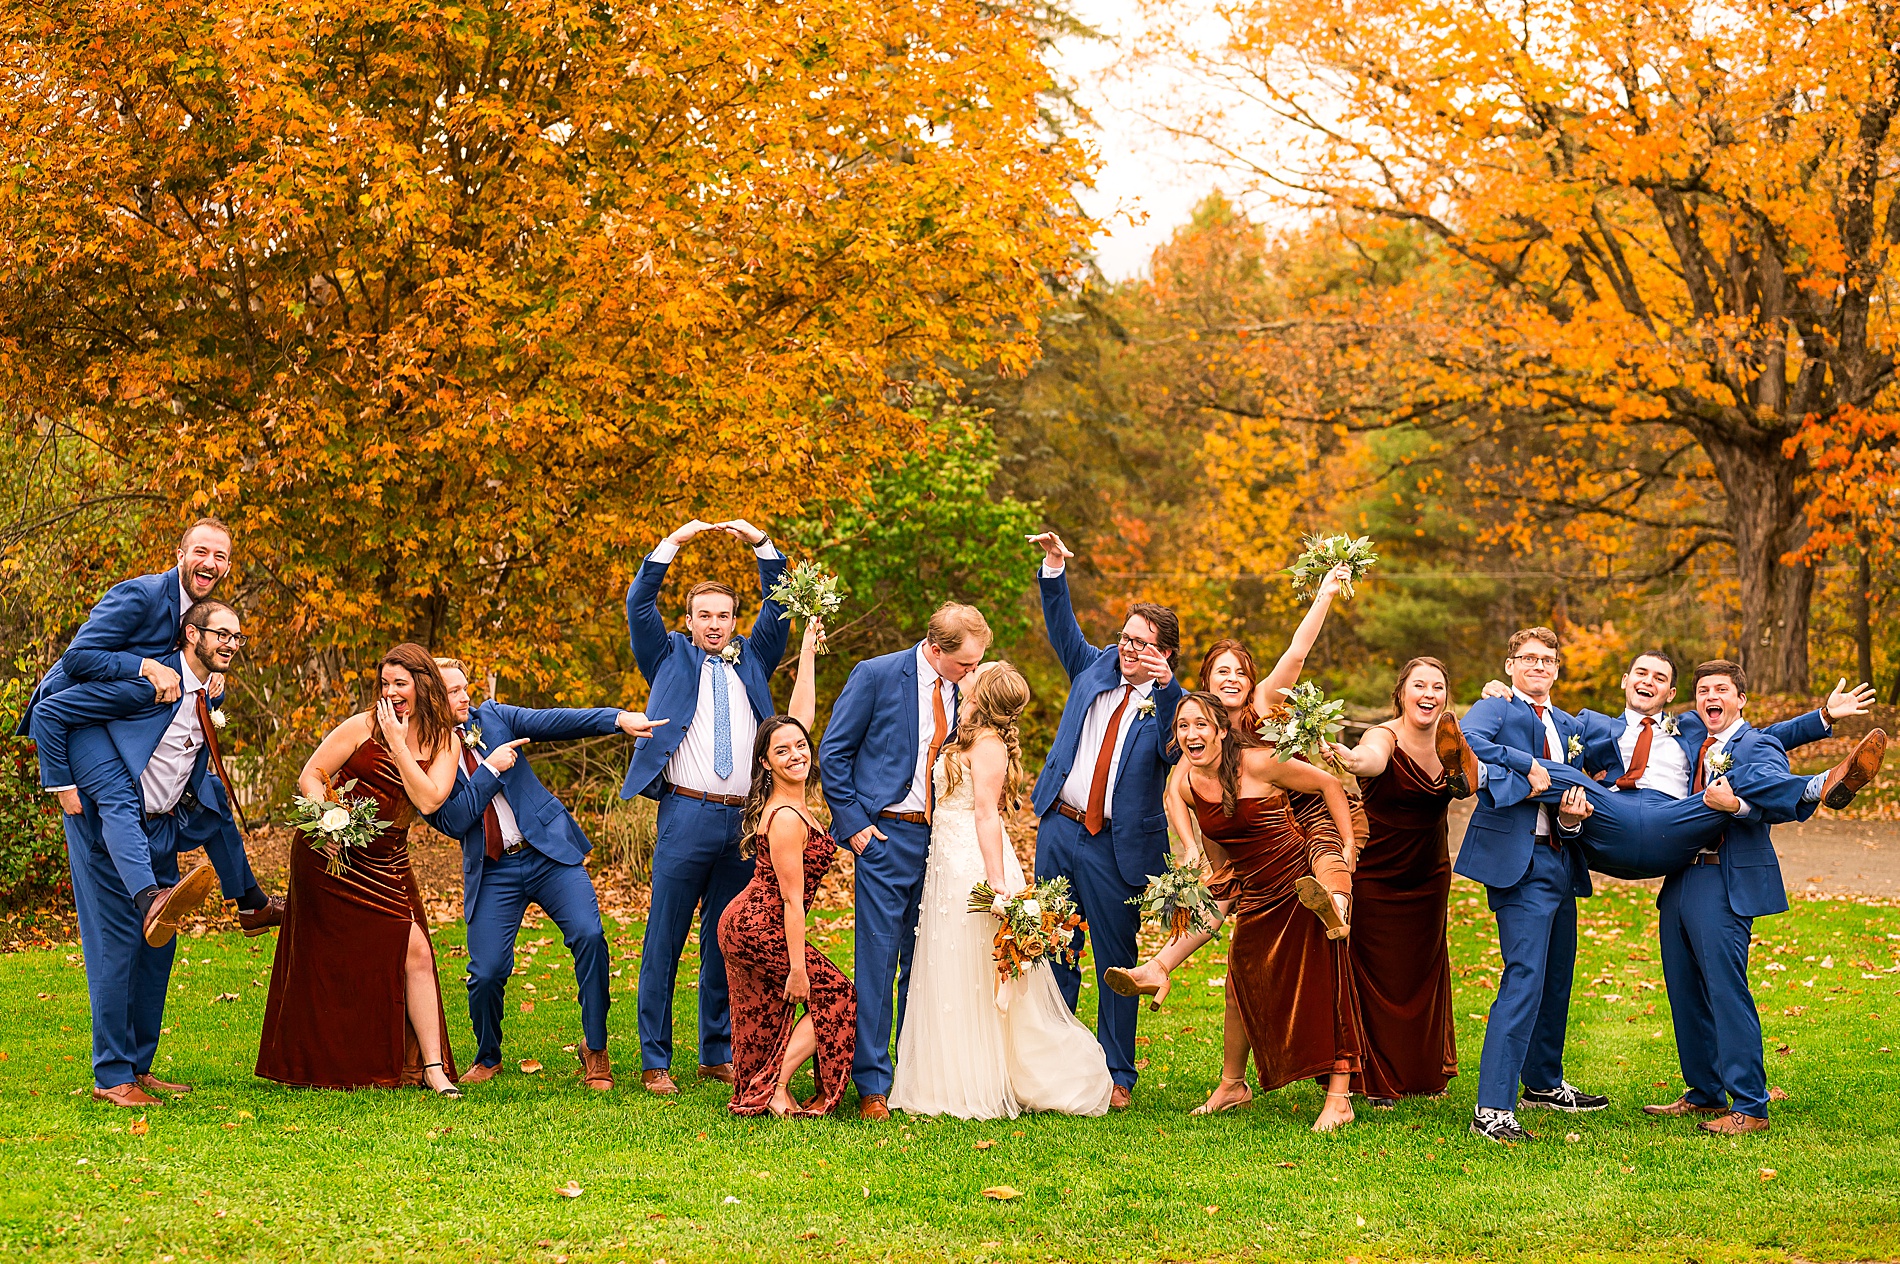 fun wedding party portraits from Enchanting Fall Wedding in Vermont at The Alerin Barn